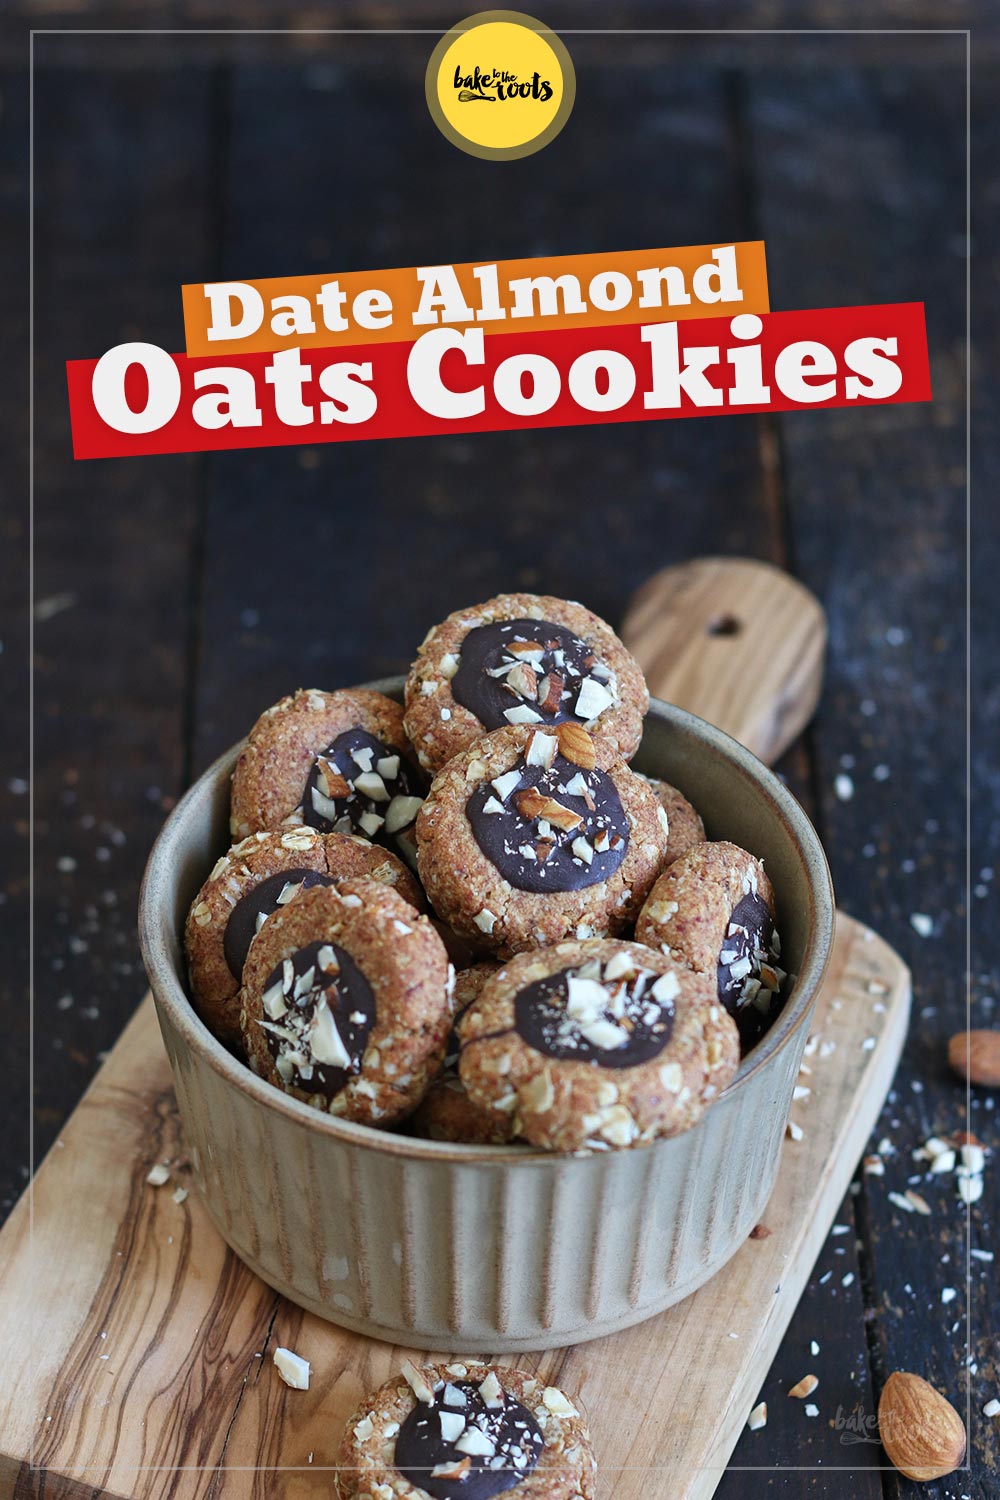 Date Almond Oats Cookies | Bake to the roots